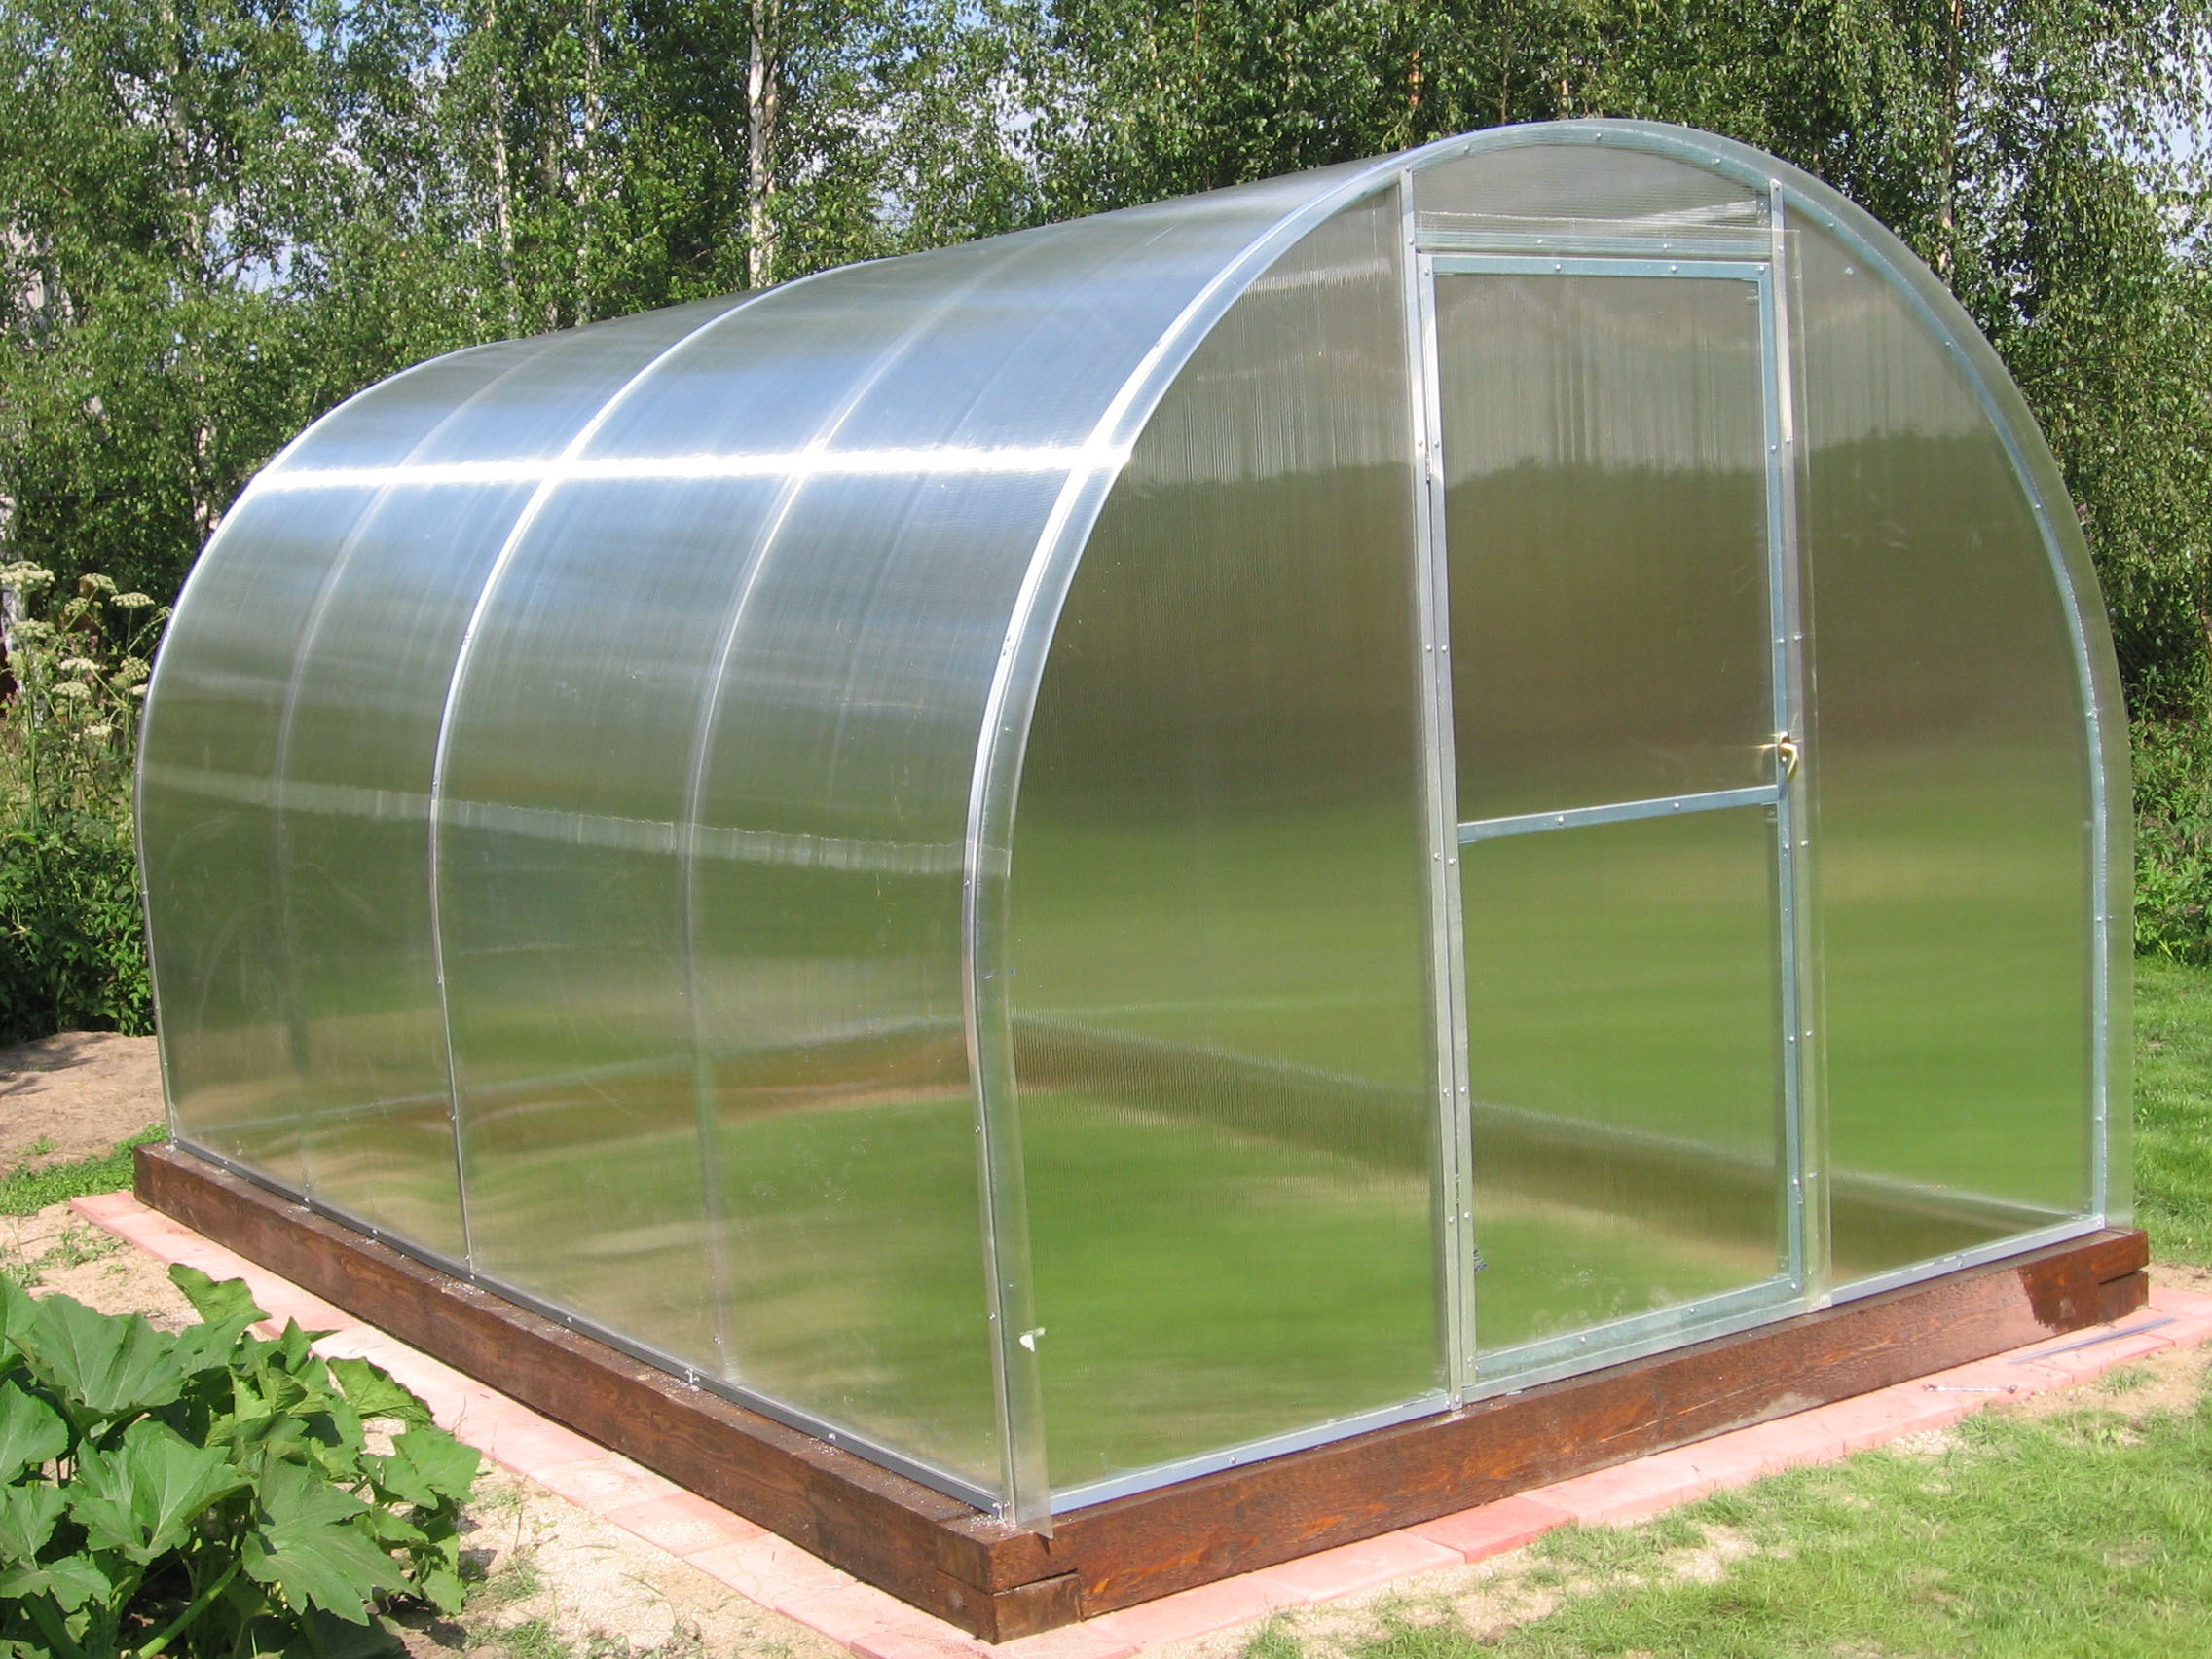 8 tips for choosing polycarbonate for a greenhouse